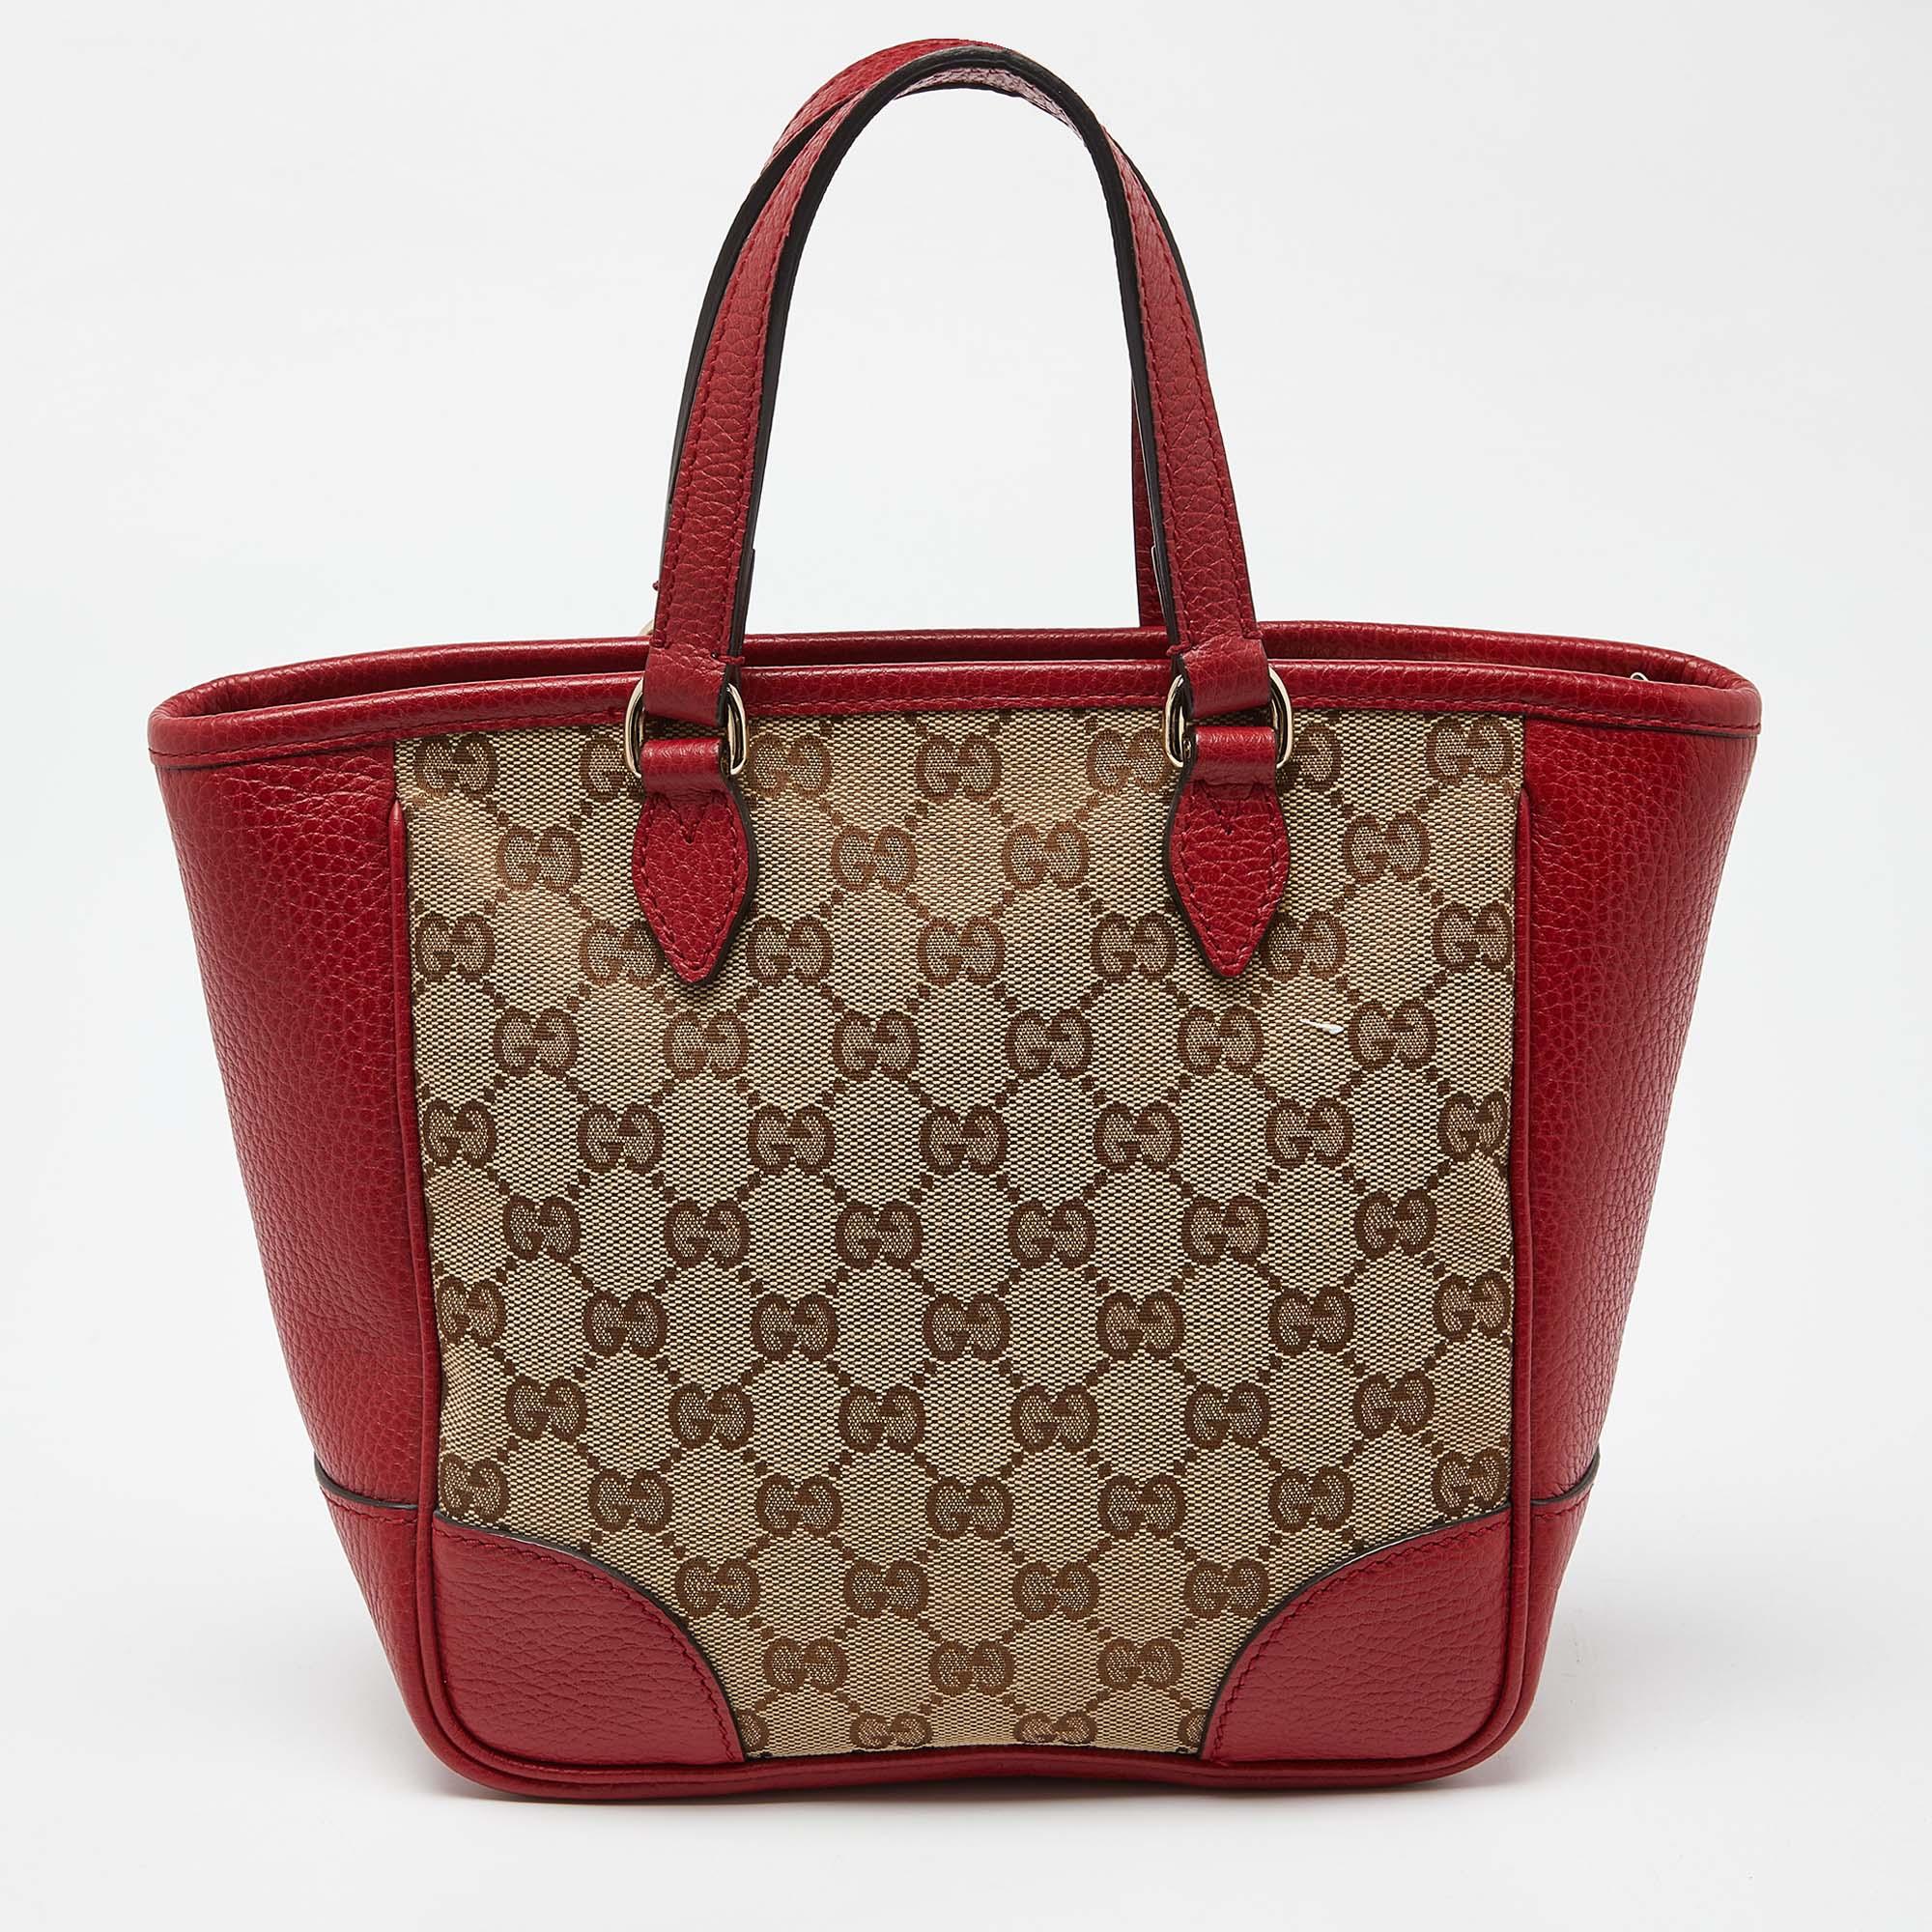 Designed to deliver style and functionality, this tote bag by Gucci has been crafted from GG canvas and leather. It features dual handles, a spacious interior, and gold-tone hardware. It is great for everyday use.

Includes: Detachable Strap